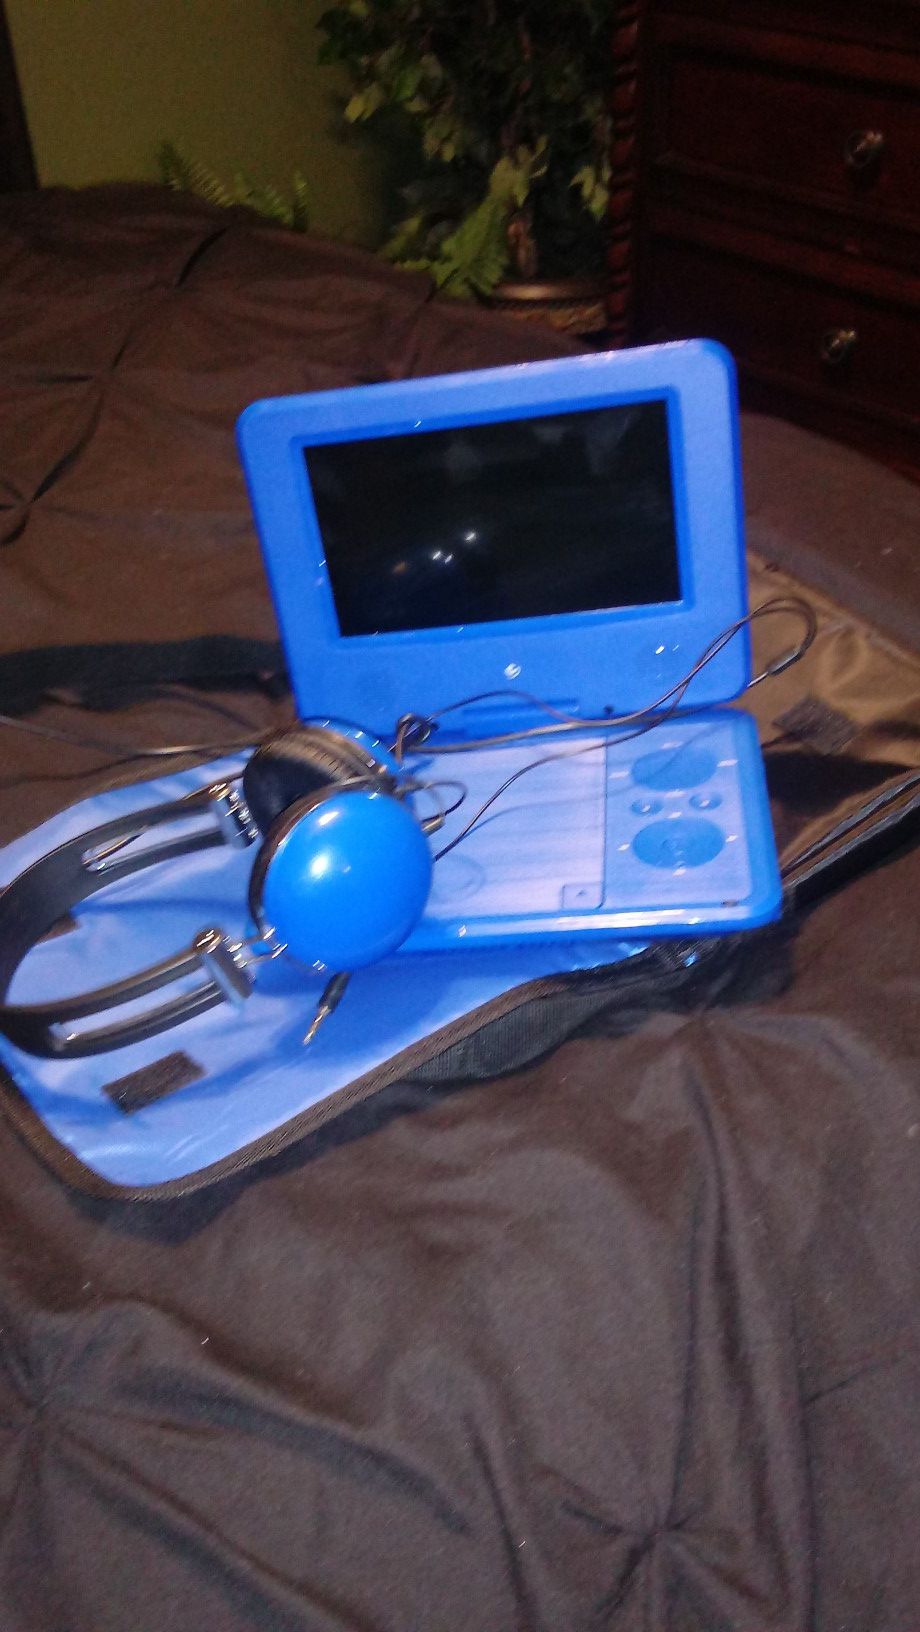 Portable dvd player with Earphones and storage bag.